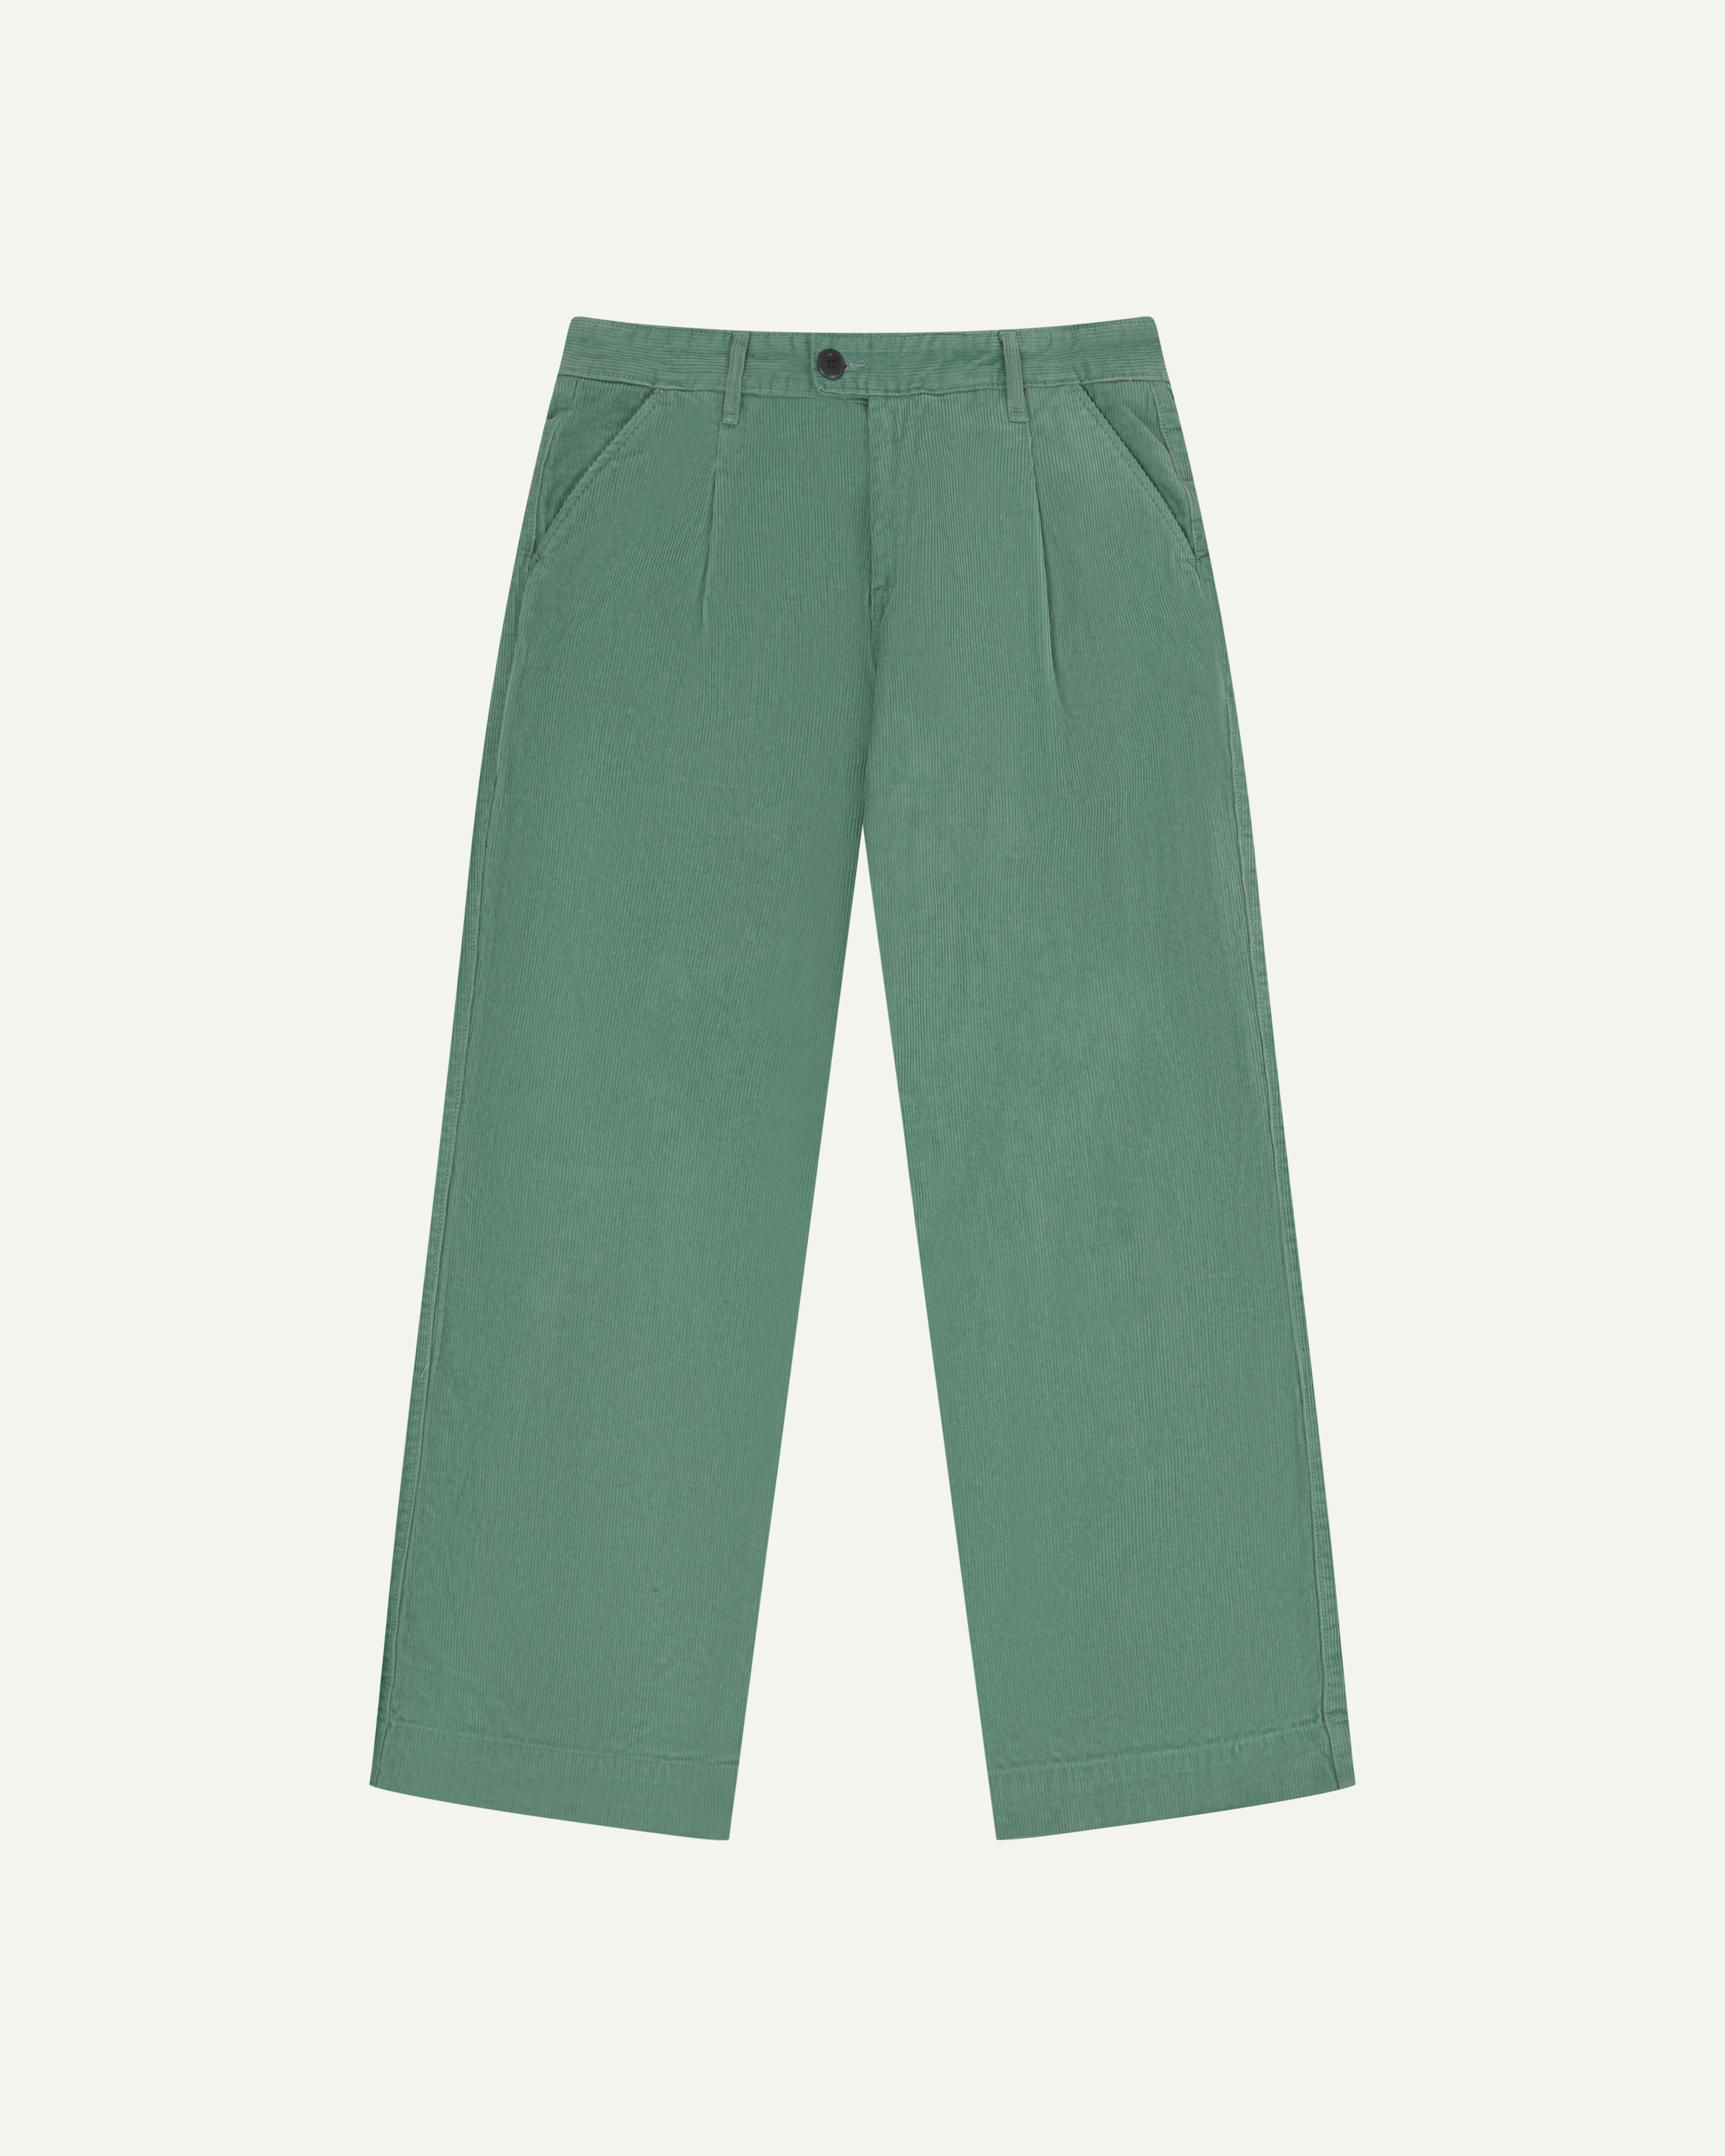 Front flat shot of #5018 Uskees men's organic corduroy boat trousers in light green showing wide leg style